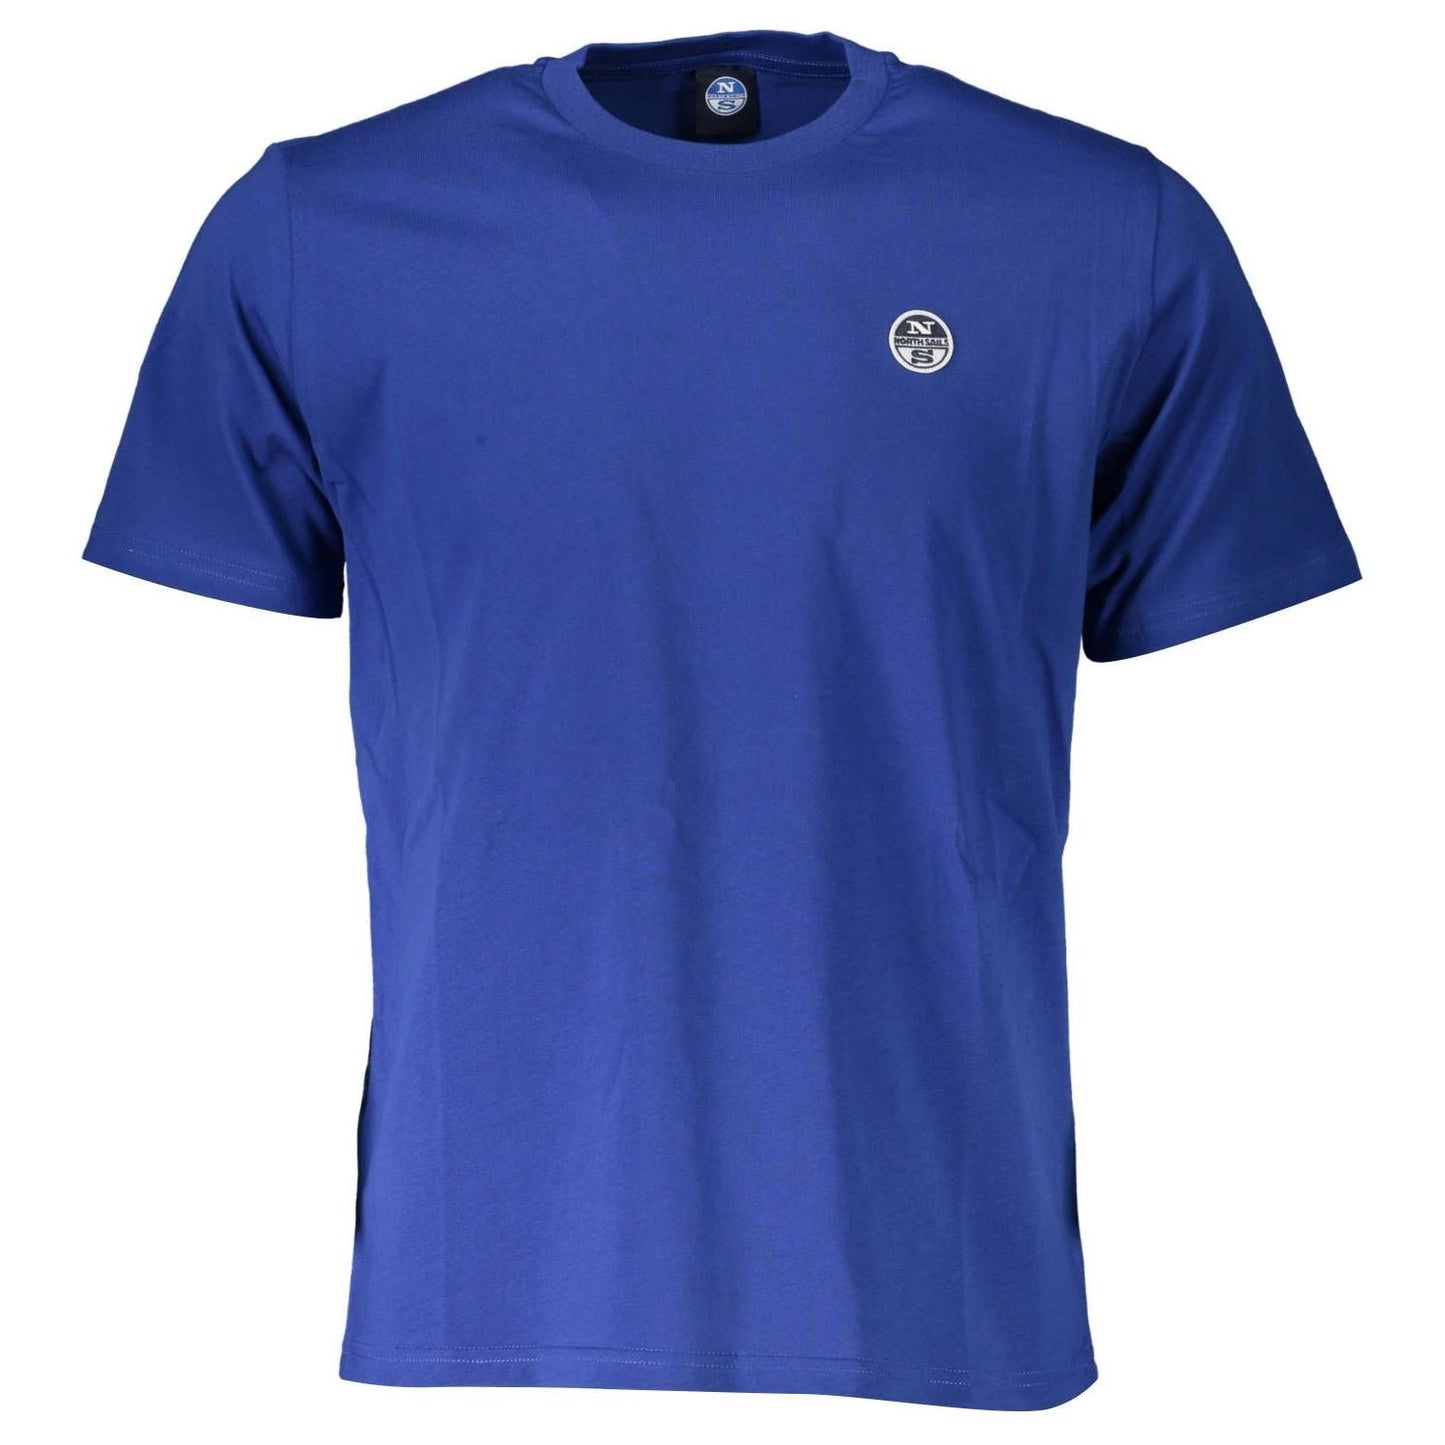 North Sails Chic Blue Cotton Tee with Iconic Logo chic-blue-cotton-tee-with-iconic-logo